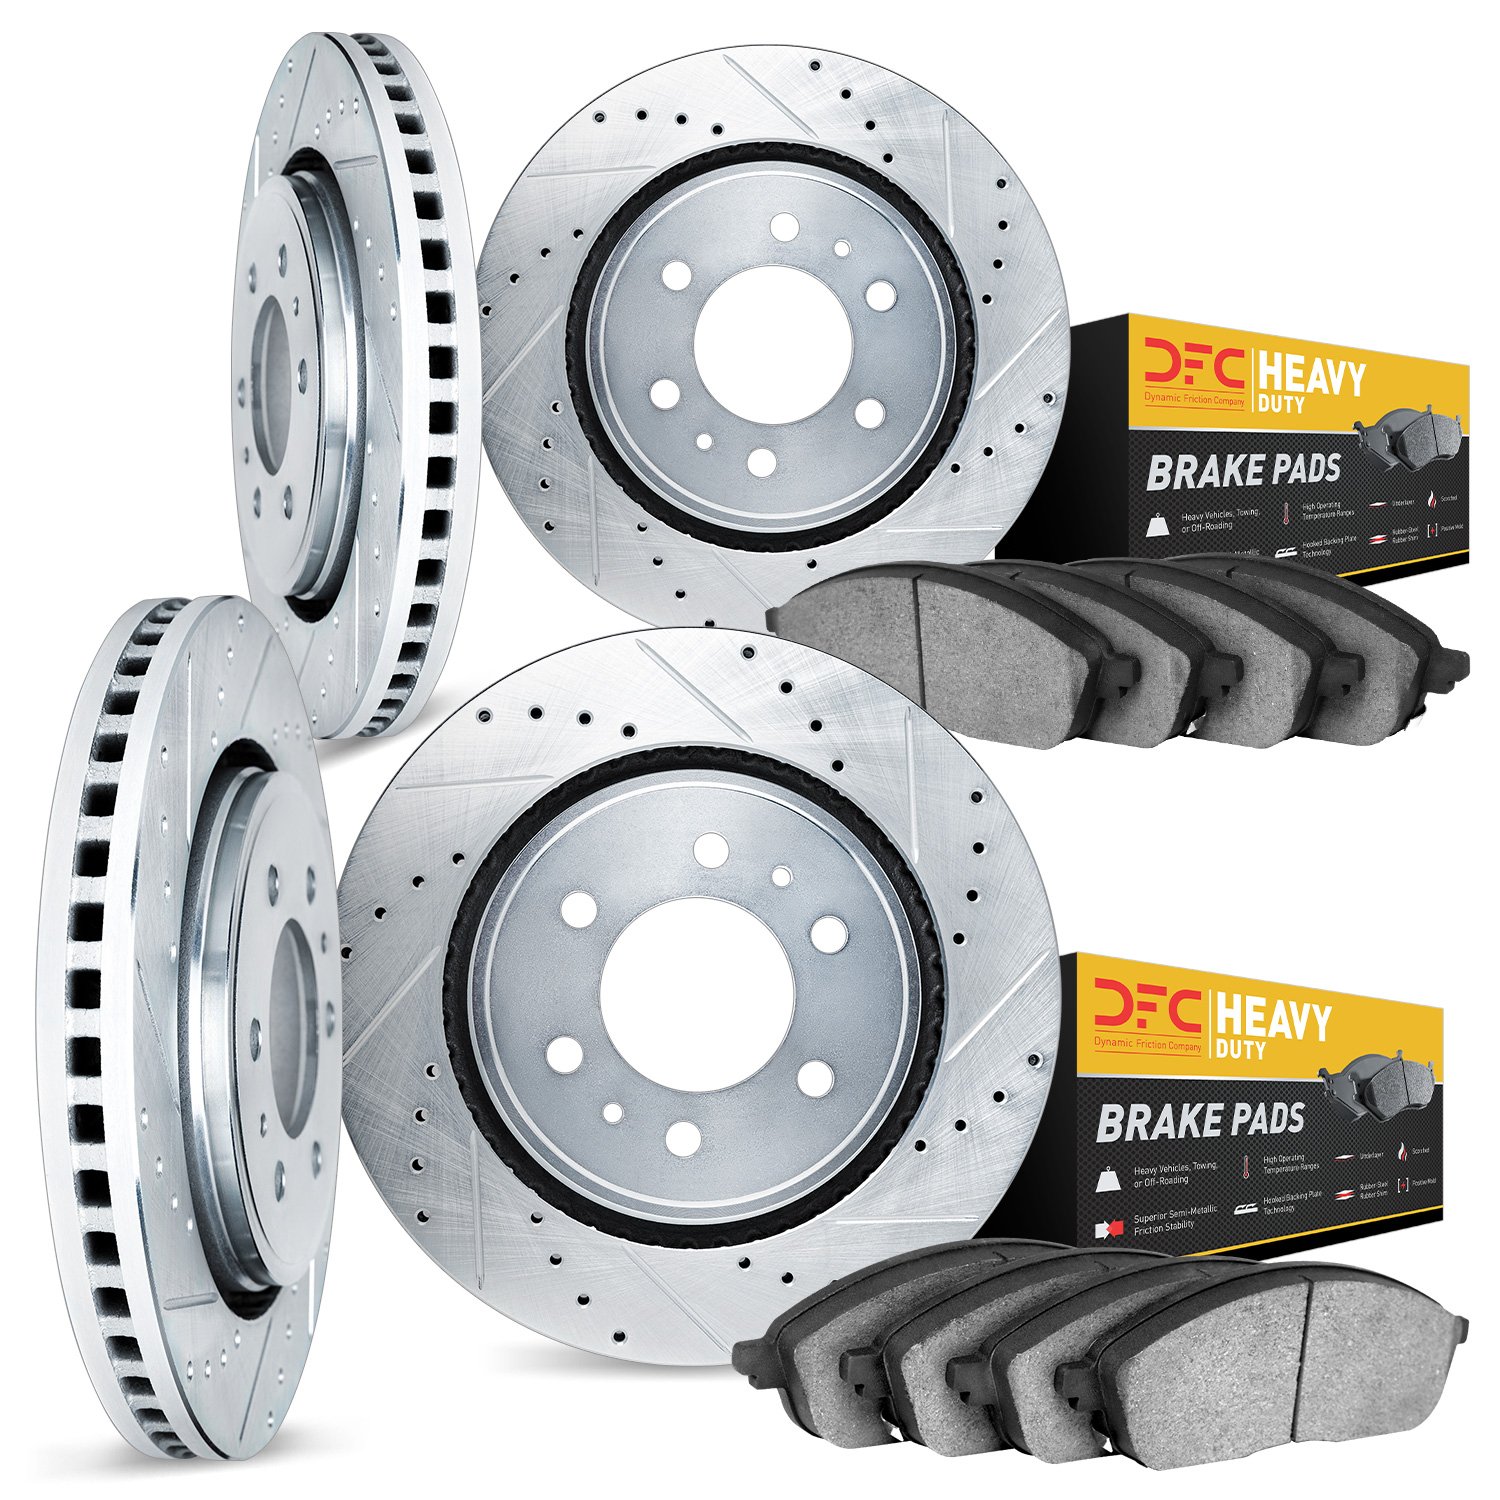 7204-48077 Drilled/Slotted Rotors w/Heavy-Duty Brake Pads Kit [Silver], 2002-2005 GM, Position: Front and Rear